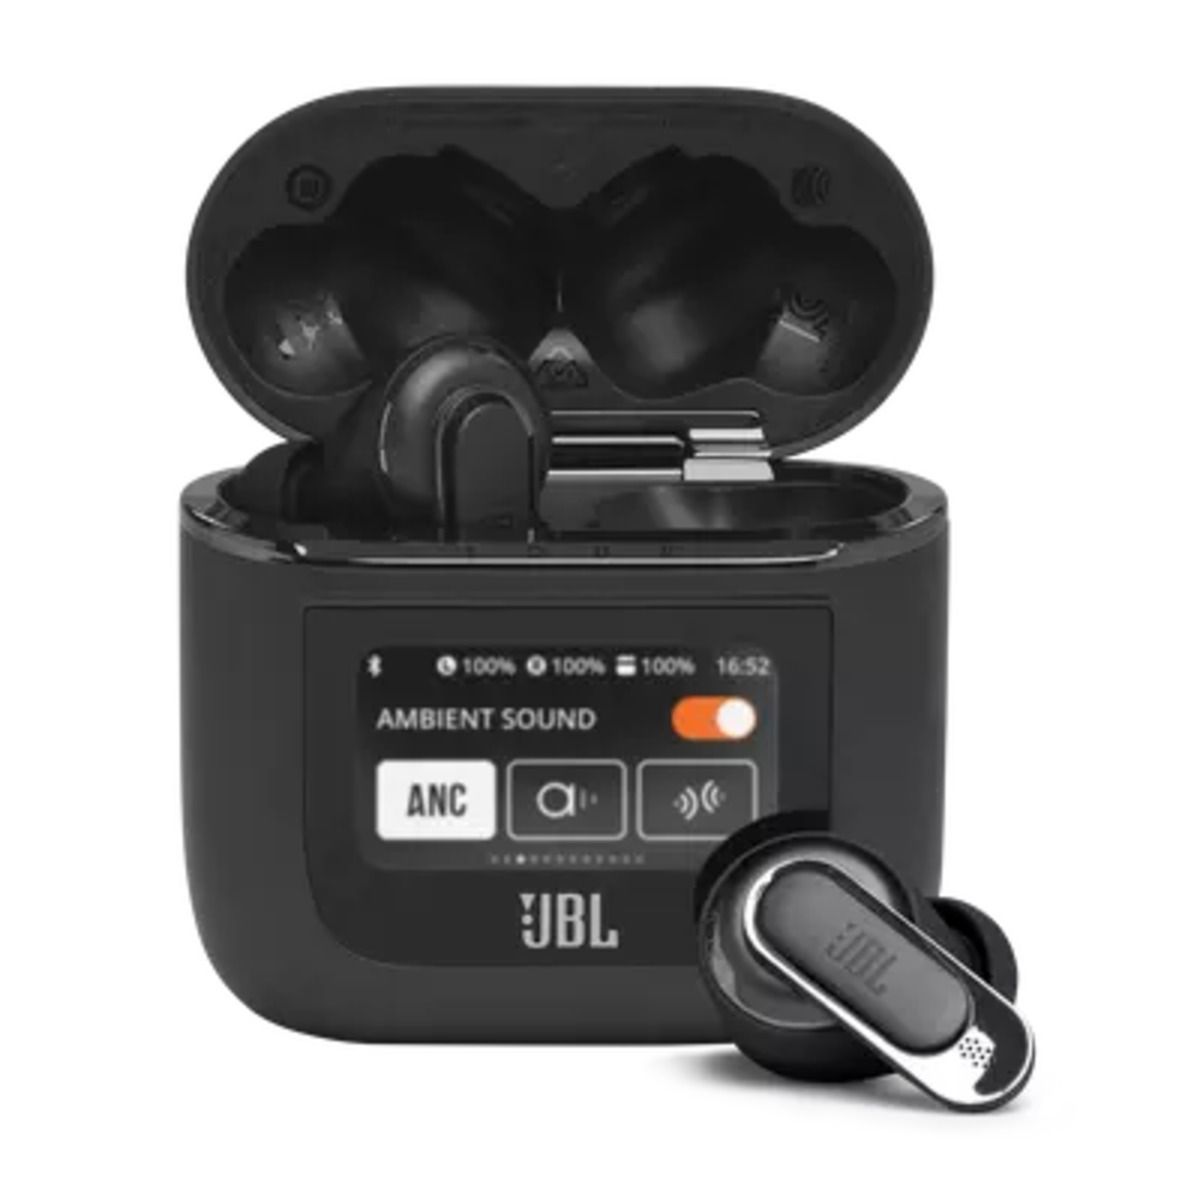 JBL Tour Pro 2 earbuds against a white background